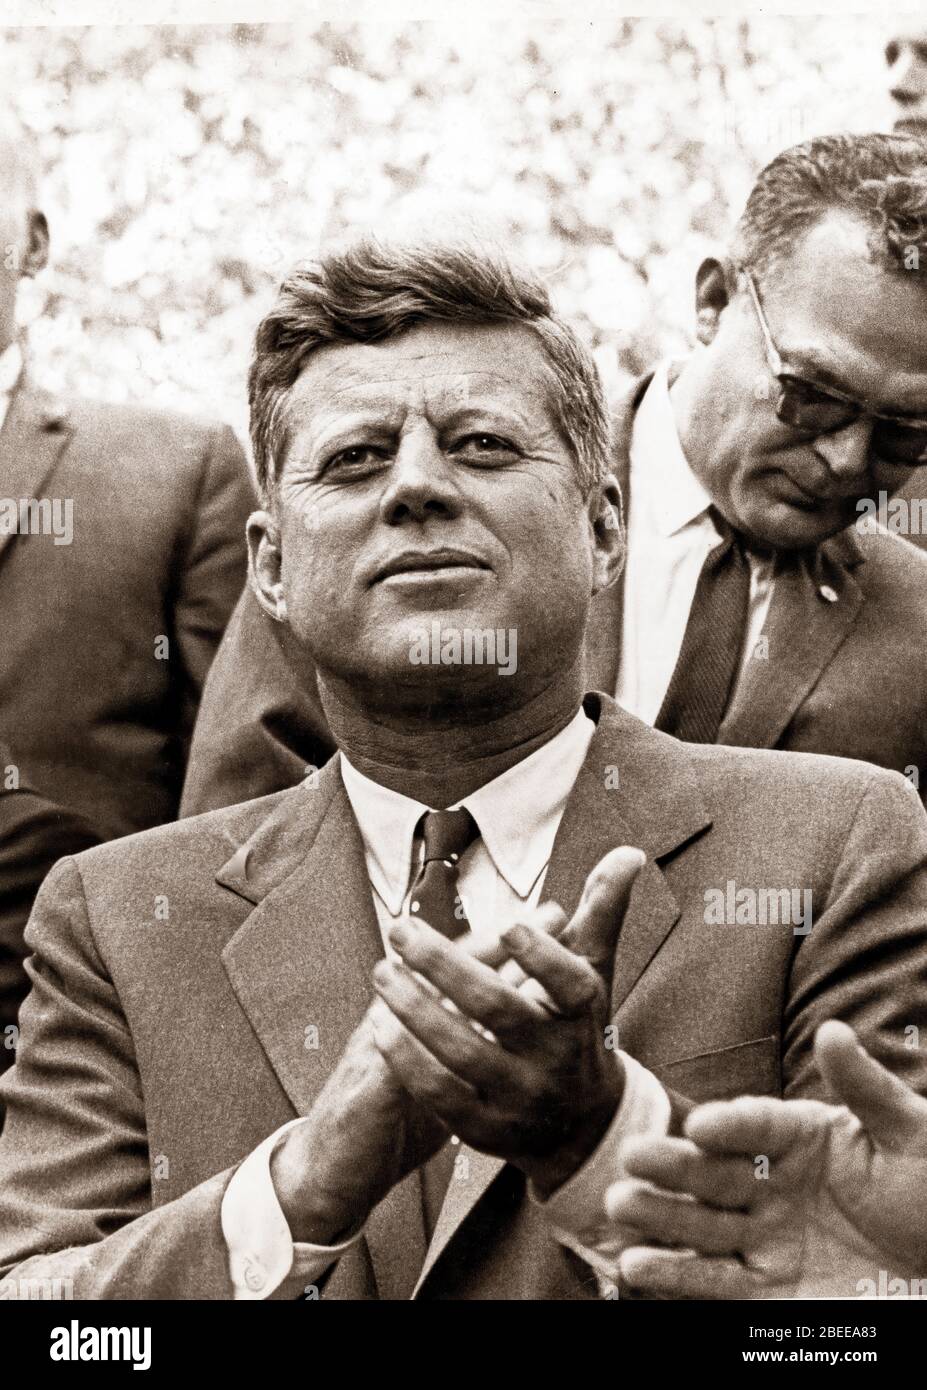 June 27, 1963 - Duganstown, Ireland, U.K. - Born into a rich, politically connected Boston family JOHN F. KENNEDY was the youngest person elected U.S. President and the first Roman Catholic to serve in that office. For many observers, his presidency came to represent the ascendance of youthful idealism in the aftermath of World War II. The promise of this energetic and telegenic leader was not to be fulfilled, as he was assassinated near the end of his third year in office. His shocking death stood at the forefront of a period of political and social instability in the country and the world. P Stock Photo